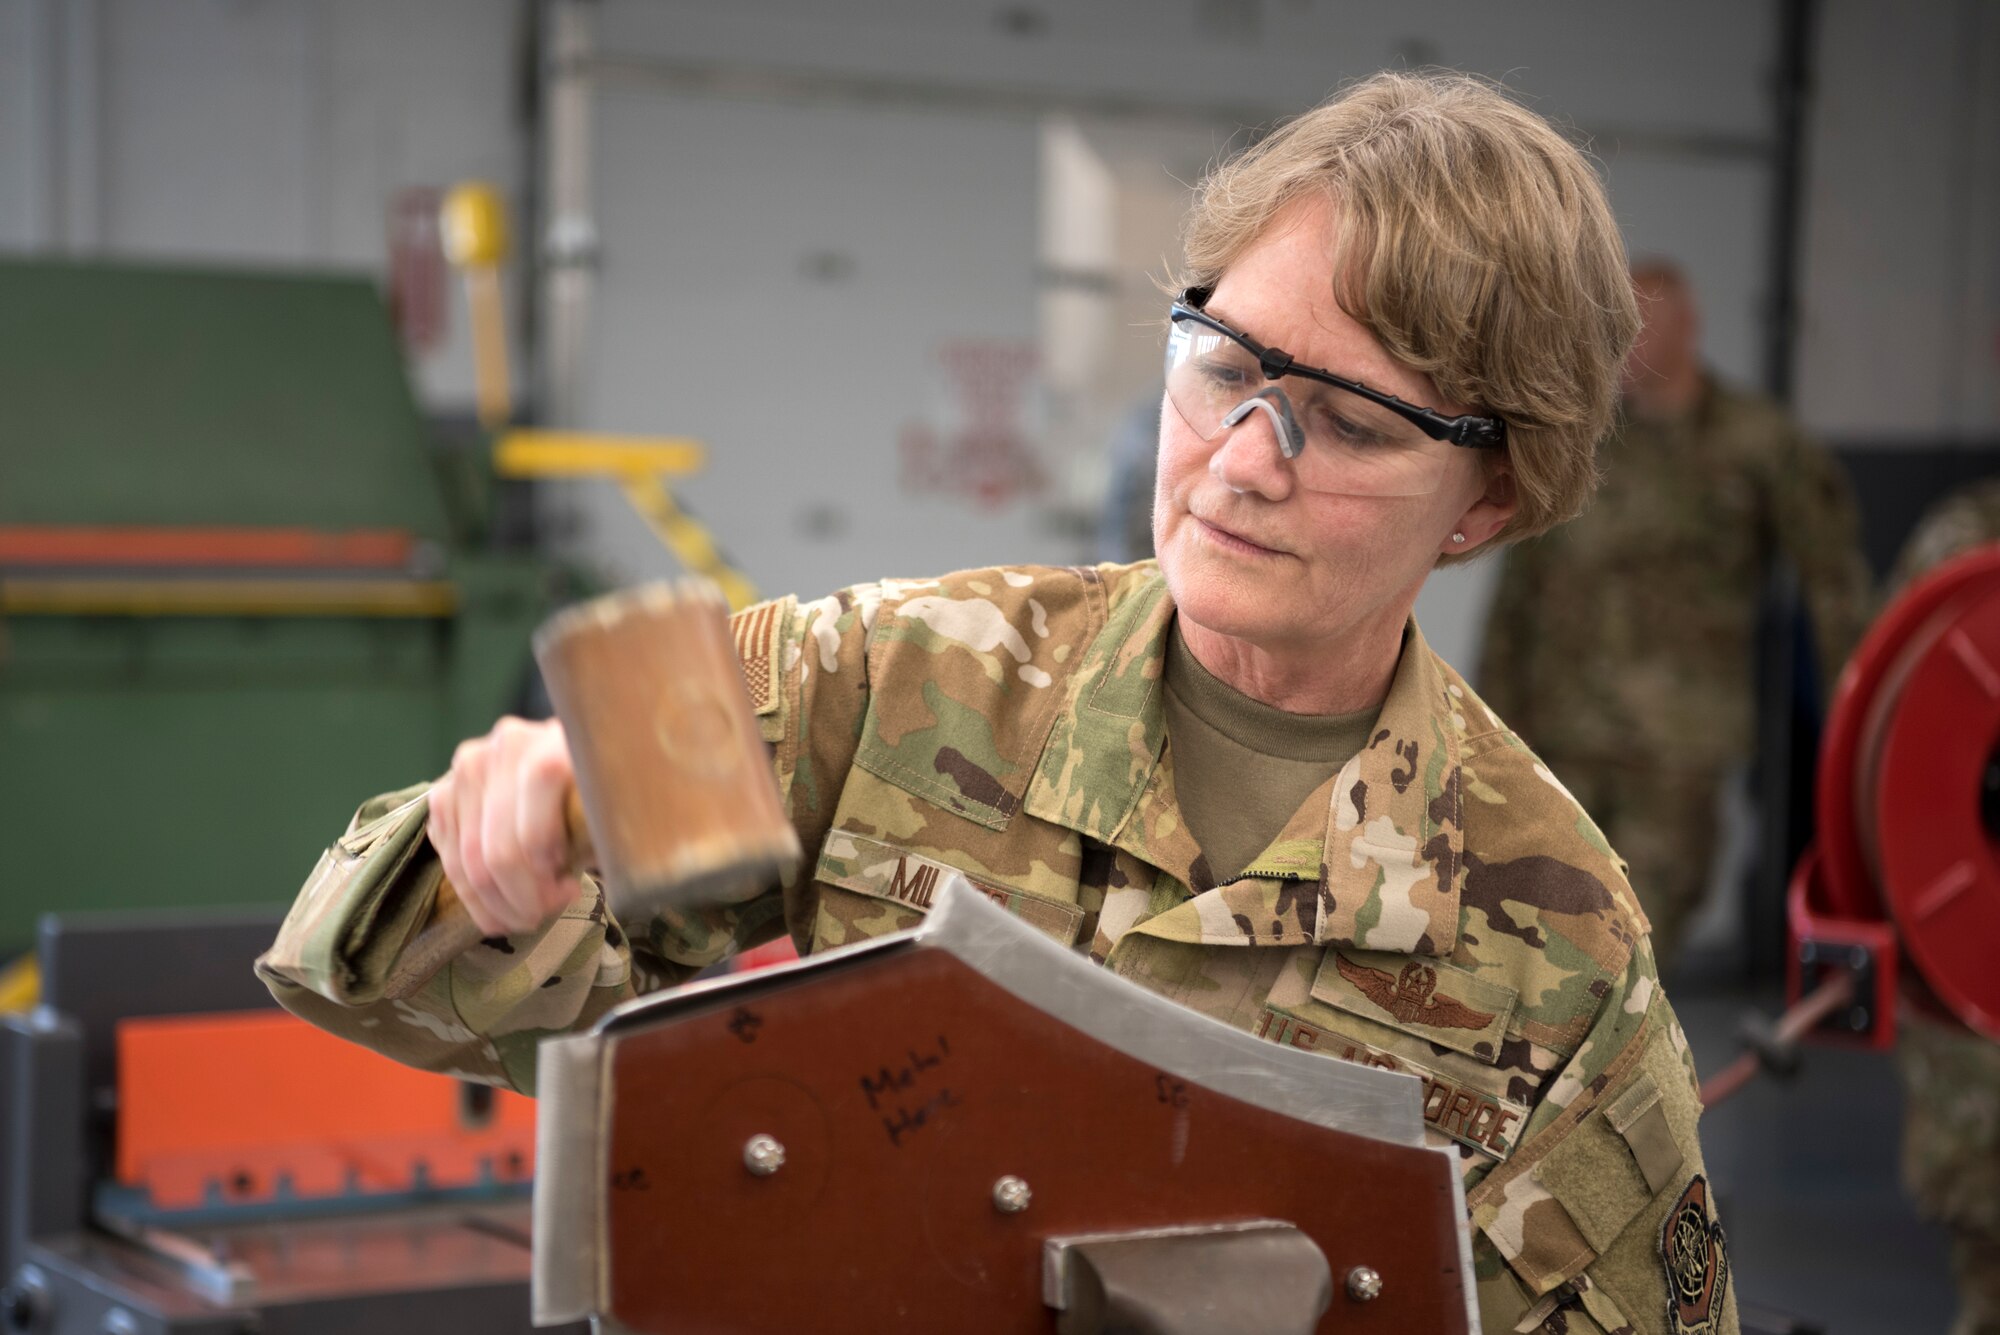 U.S. Air Force Gen. Maryanne Miller, Air Mobility Command commander, molds a piece of metal during a visit to the fabrication flight at MacDill Air Force Base, Fla., Feb. 13, 2020. Miller visited MacDill and toured various squadrons around the base Feb. 12-14, 2020.